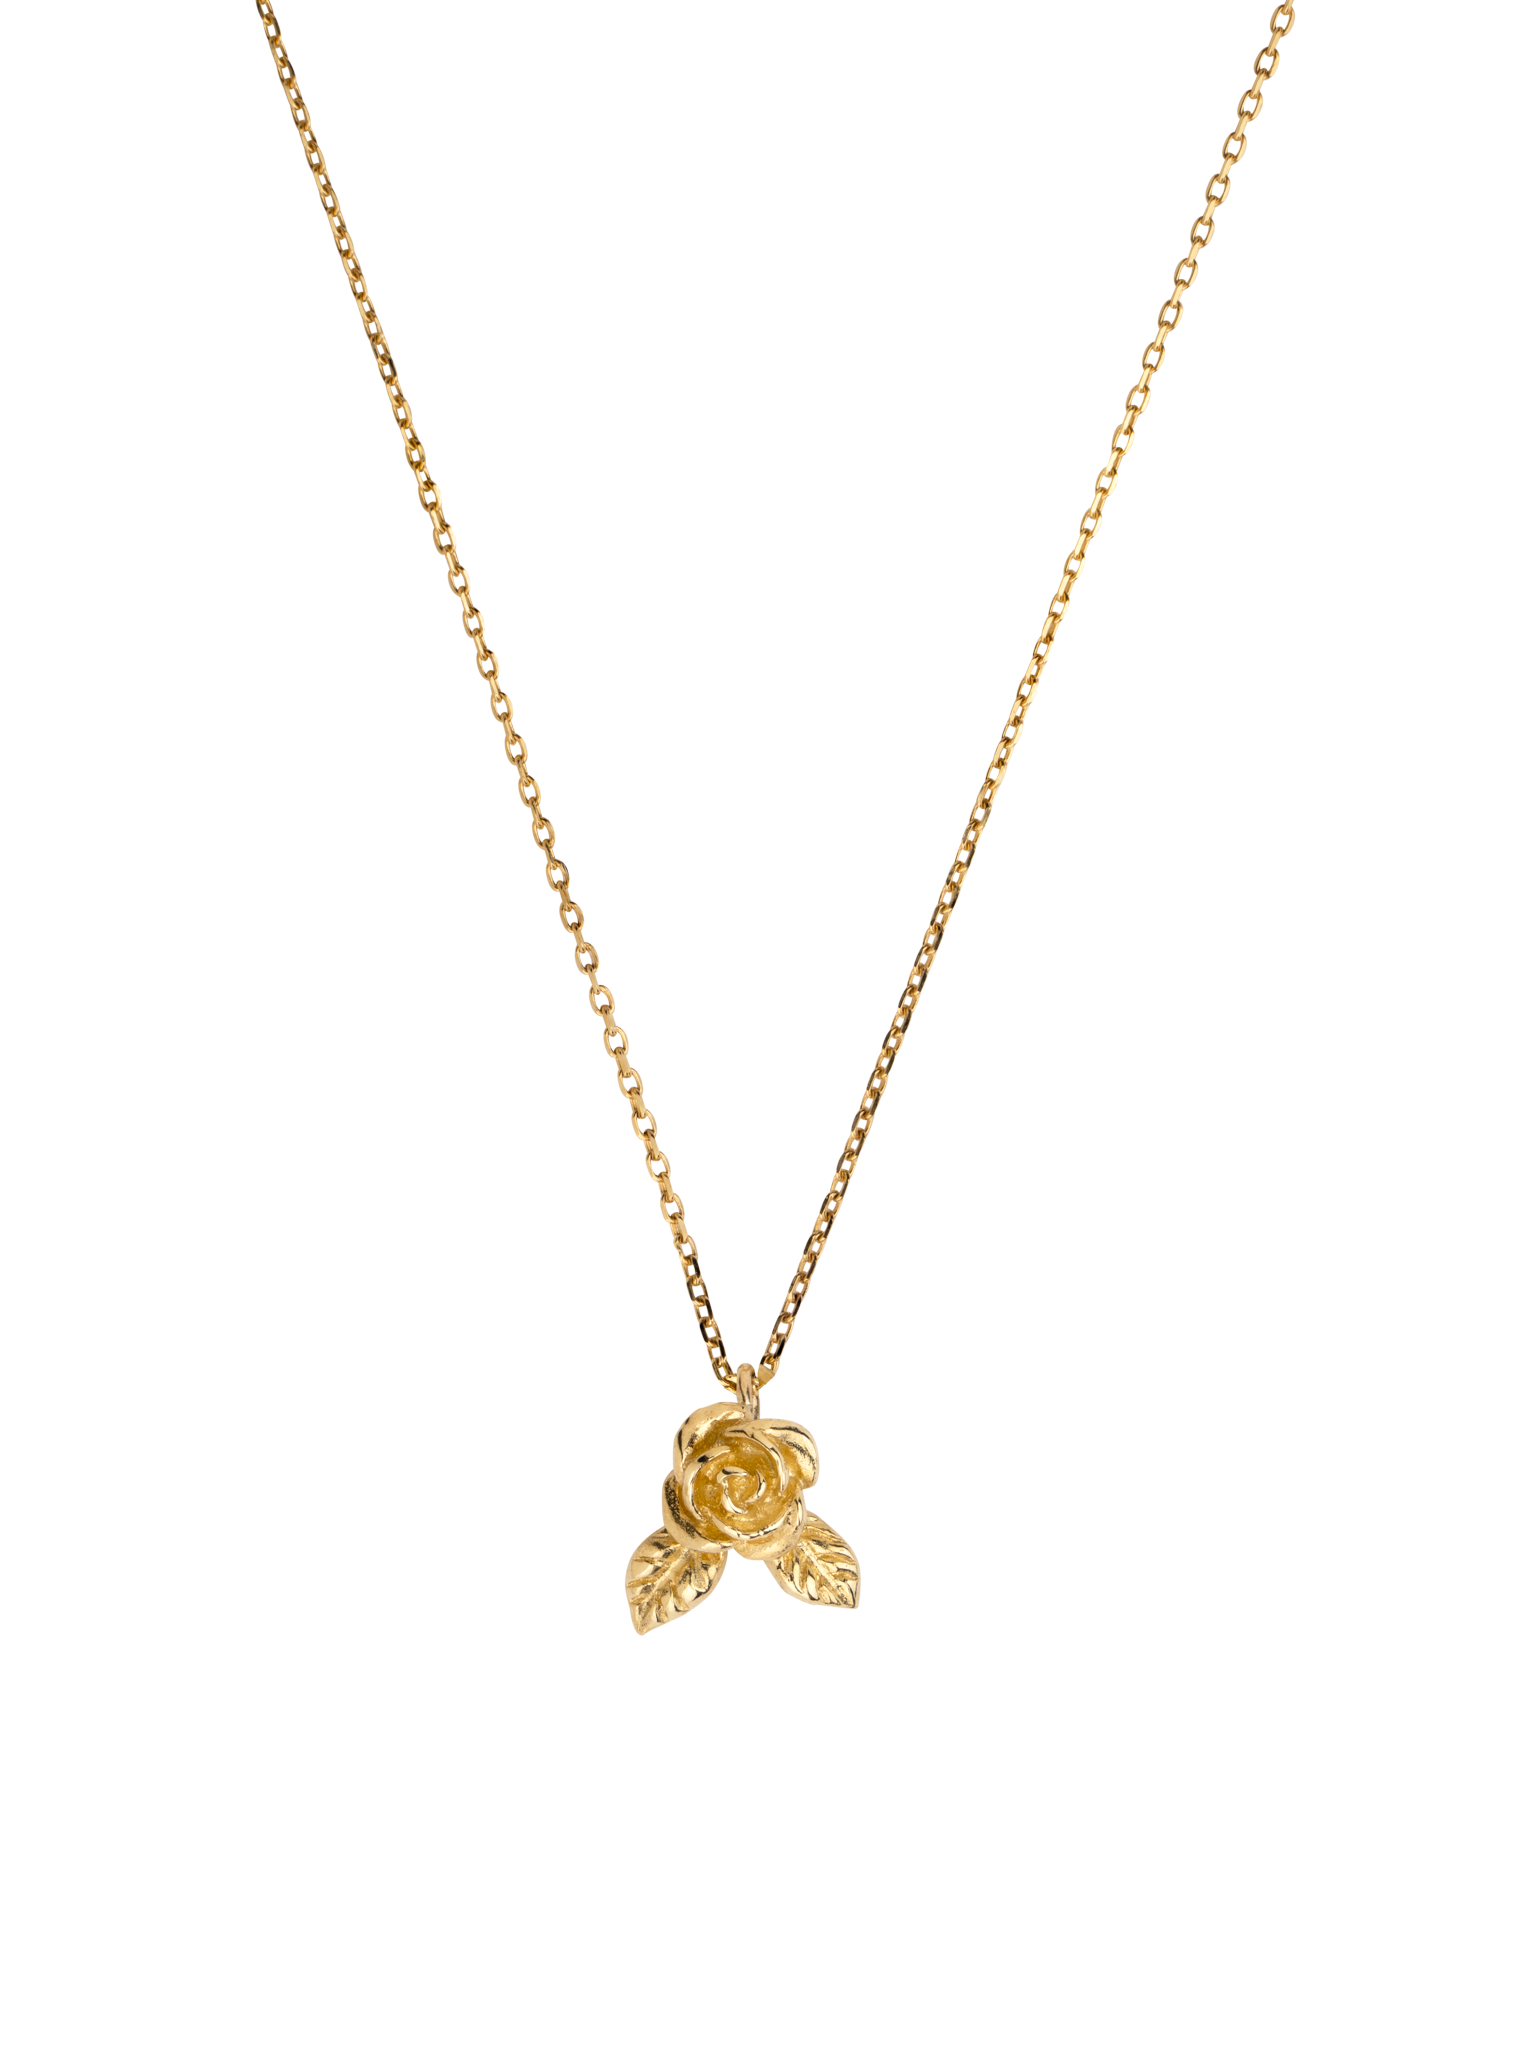 9ct Gold roses are red pendant necklace